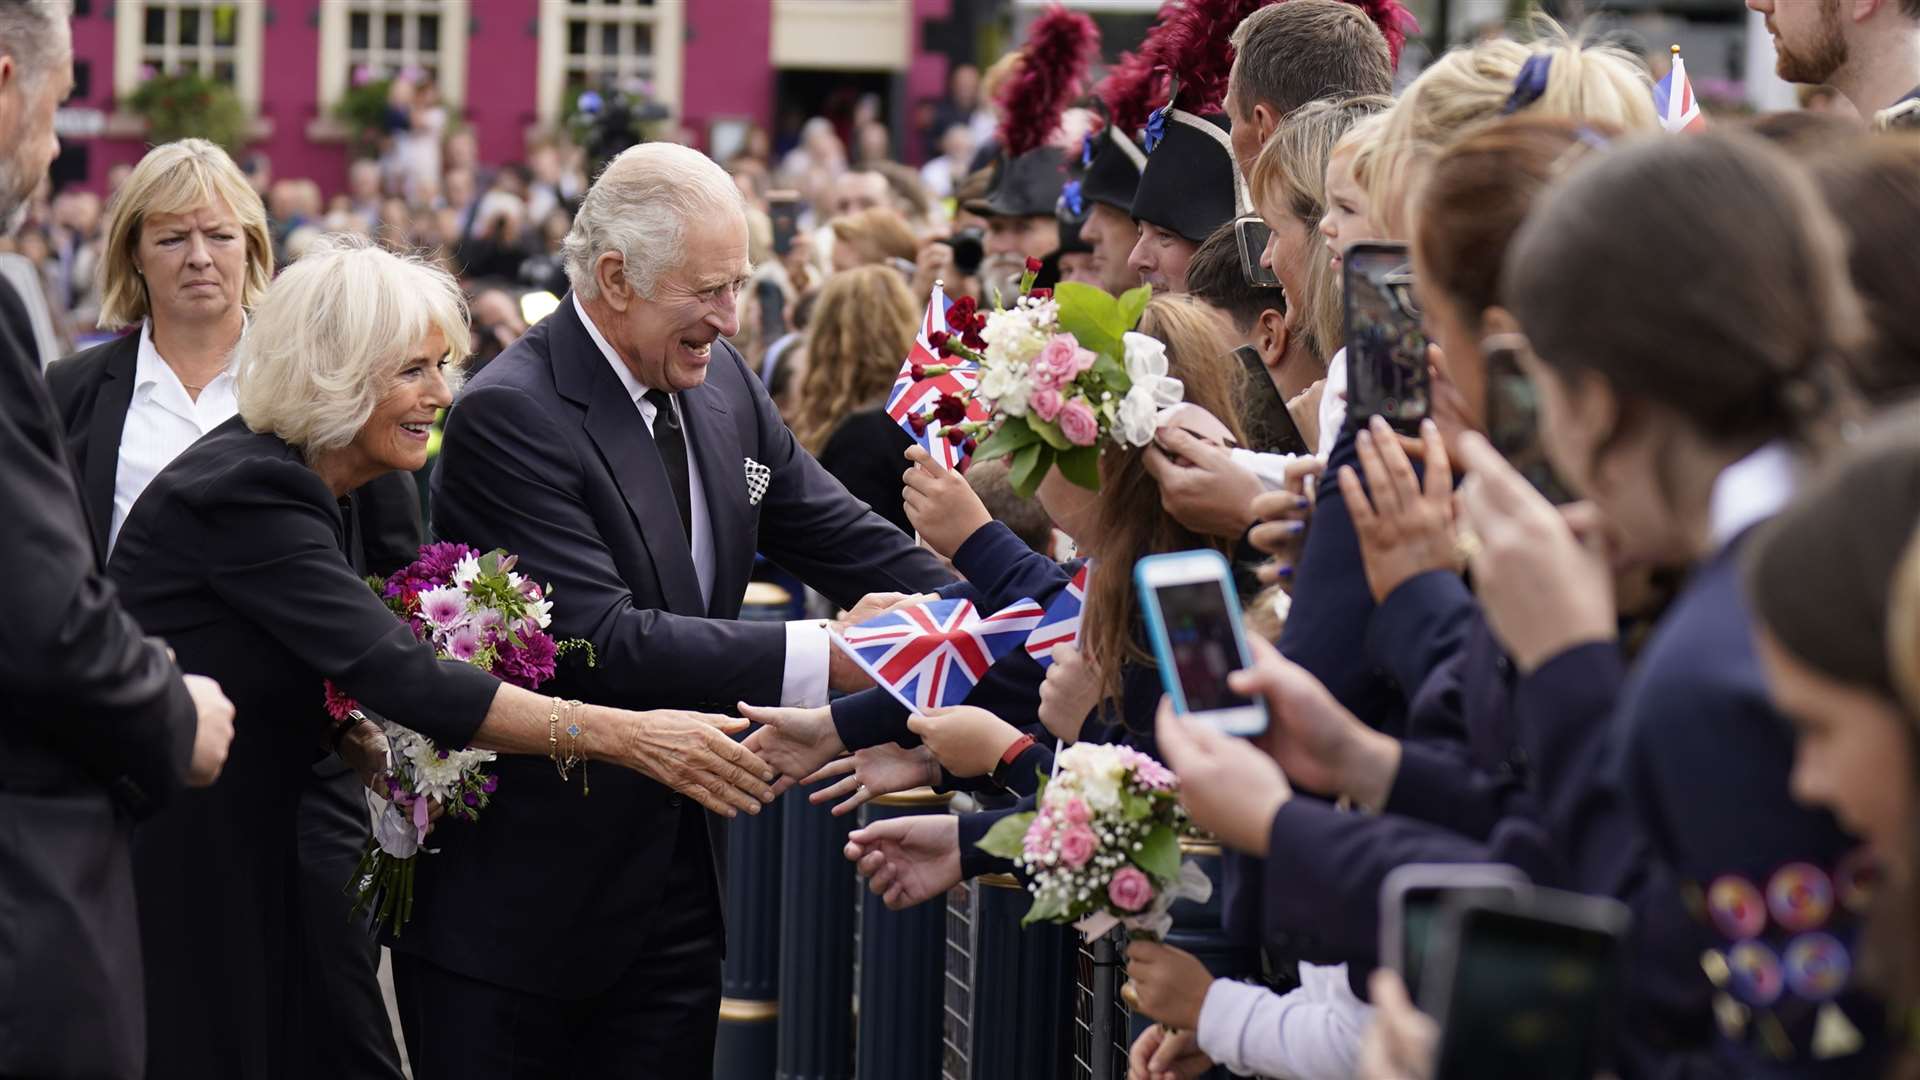 Charles and Camilla speak to people in the crowd (Niall Carson/PA)